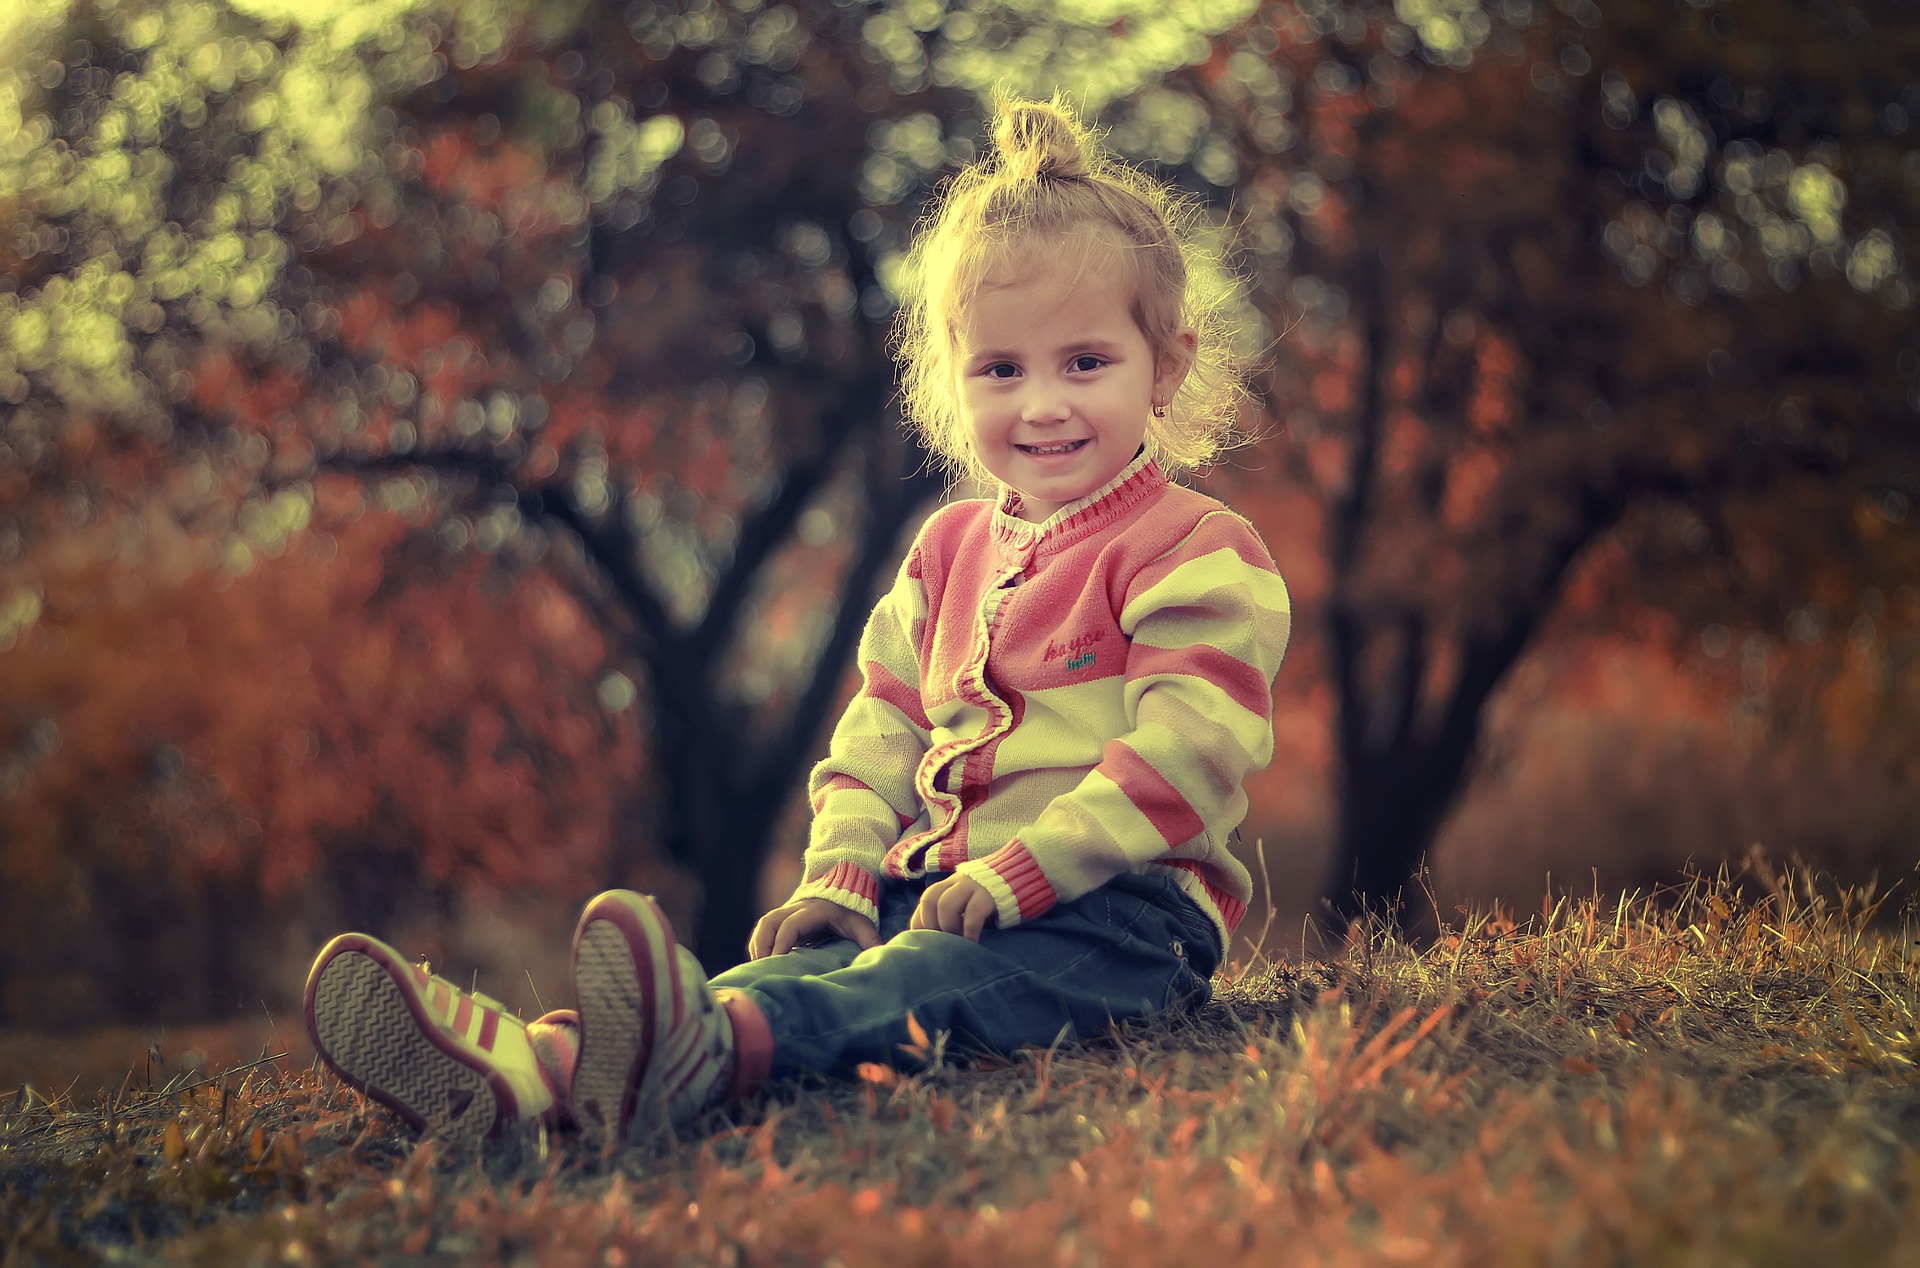 Little girl in the park photo